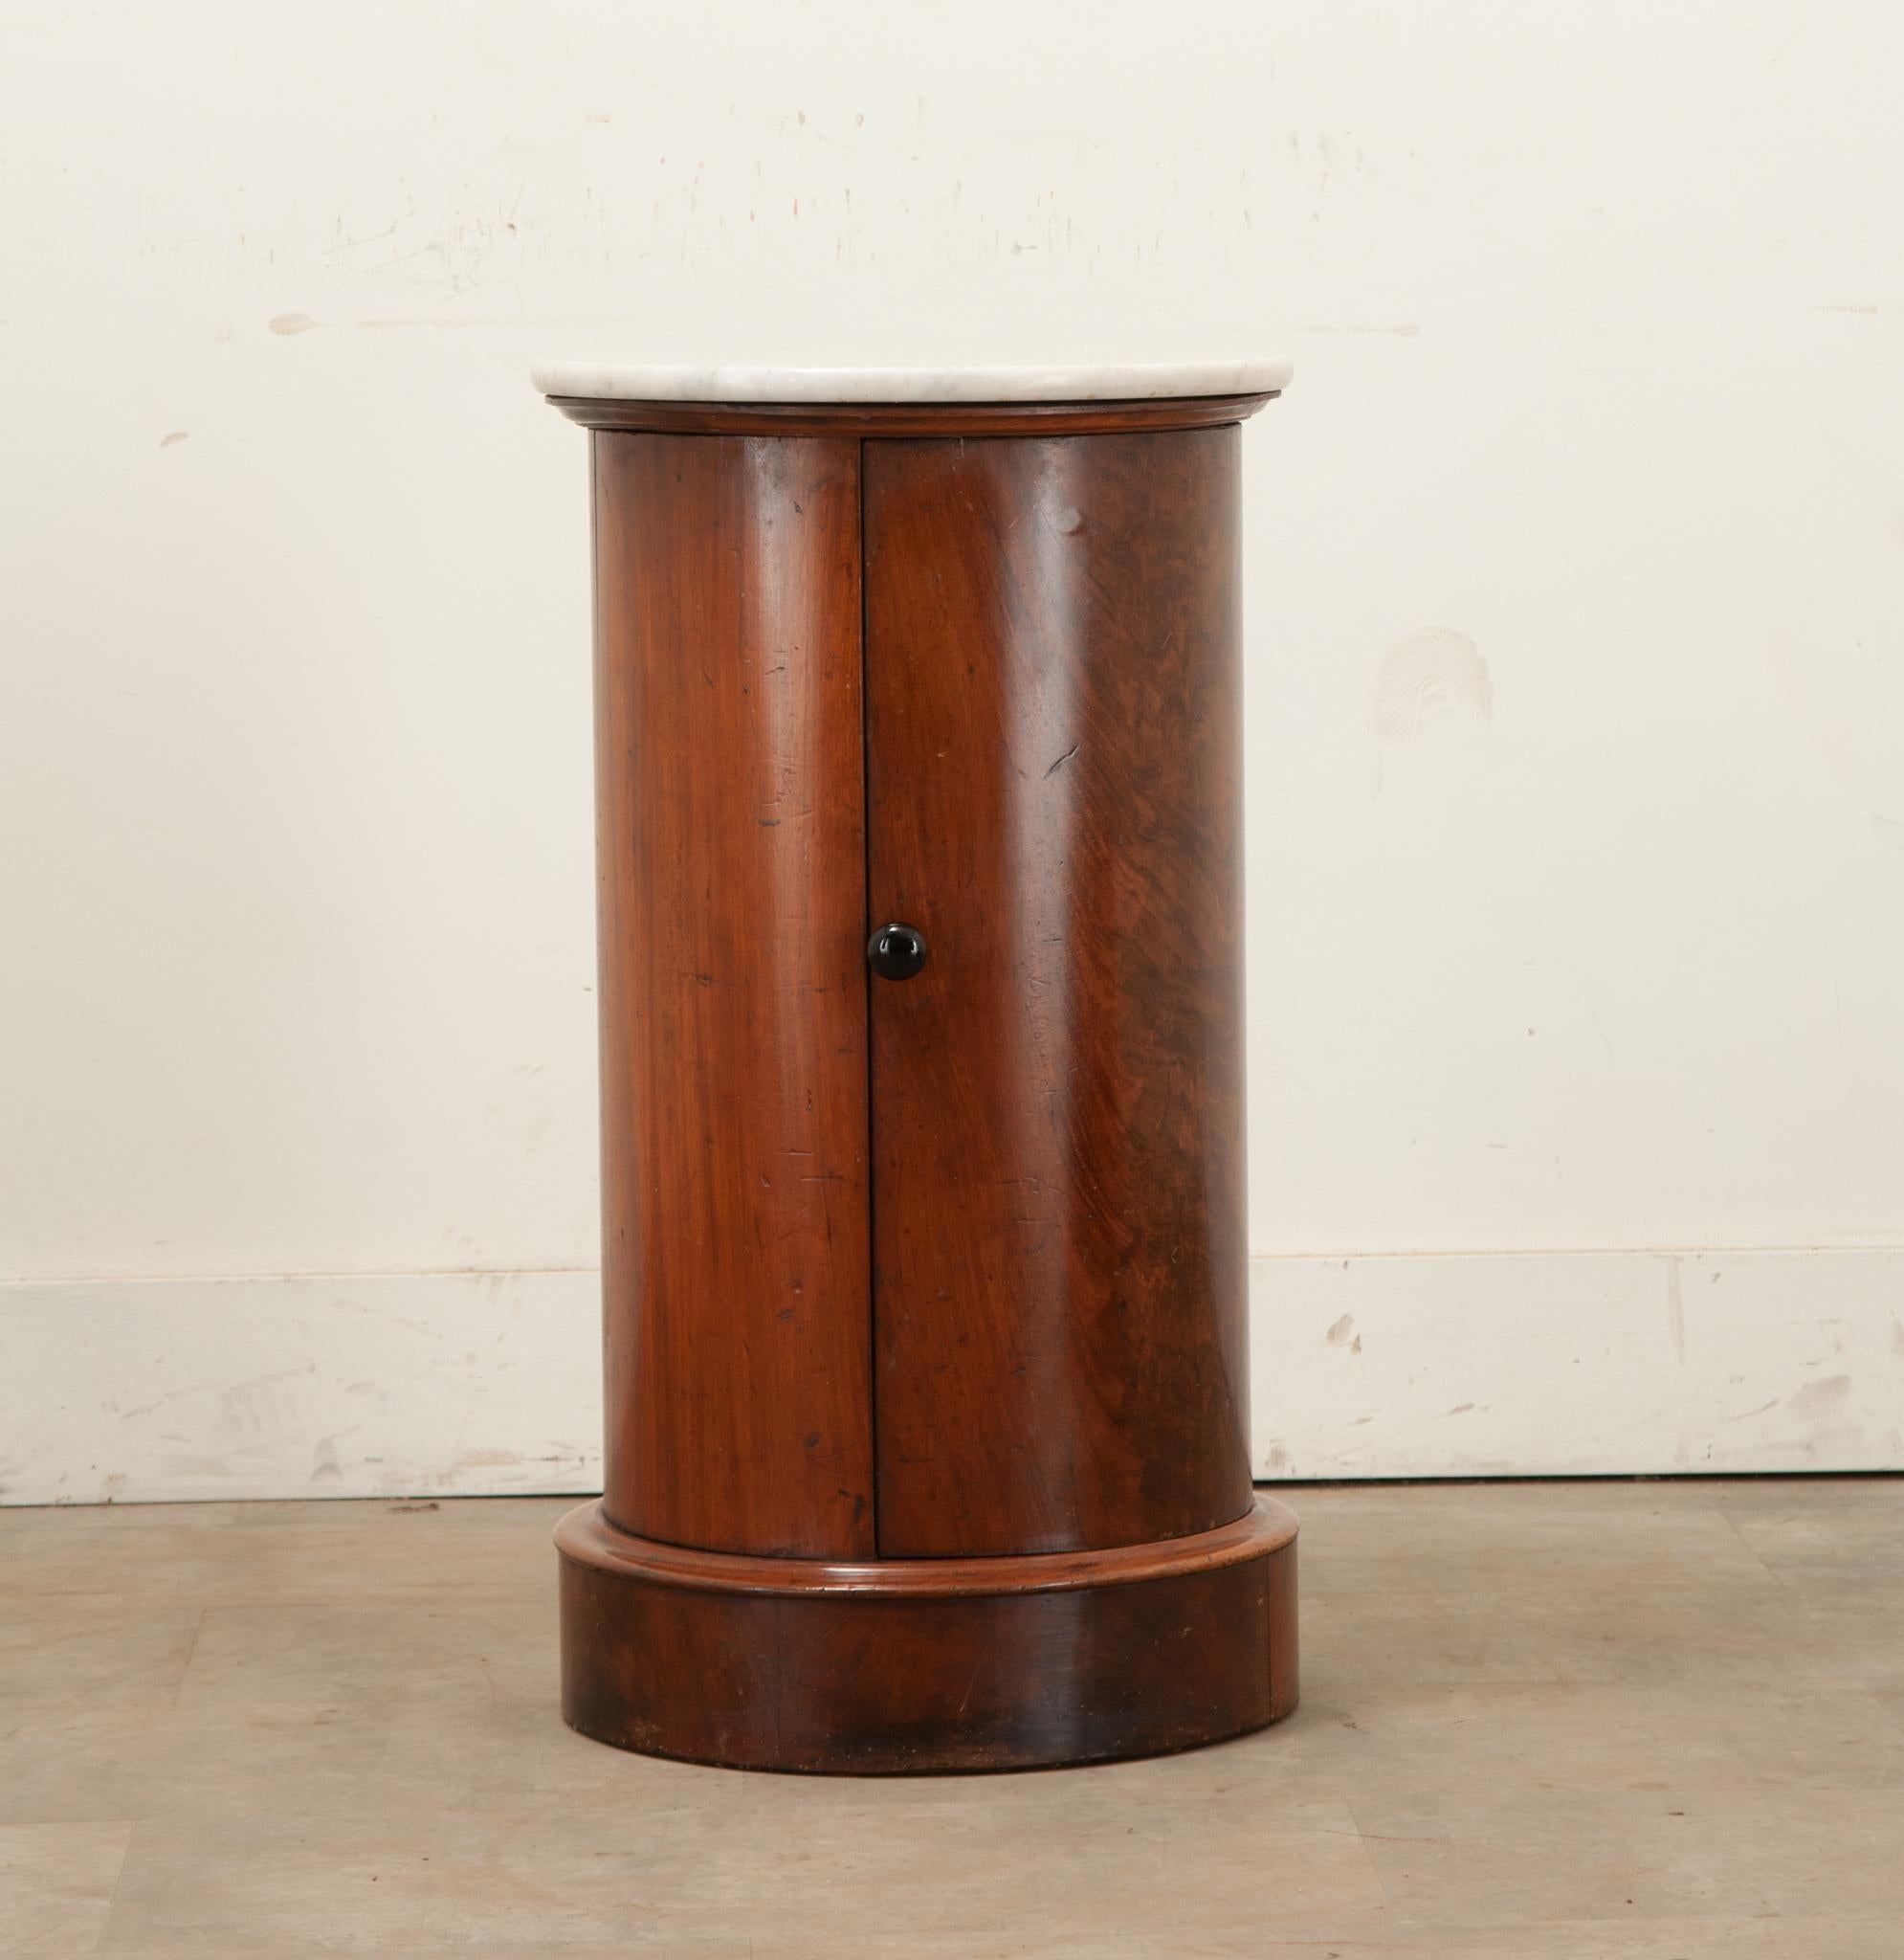 A round mahogany and marble English bedside table. This table has a white beveled marble top over a mahogany body with a door that has a ebonized knob and opens to reveal a single circular fixed shelf at 11 ⅝” deep. The whole sits on a round plinth